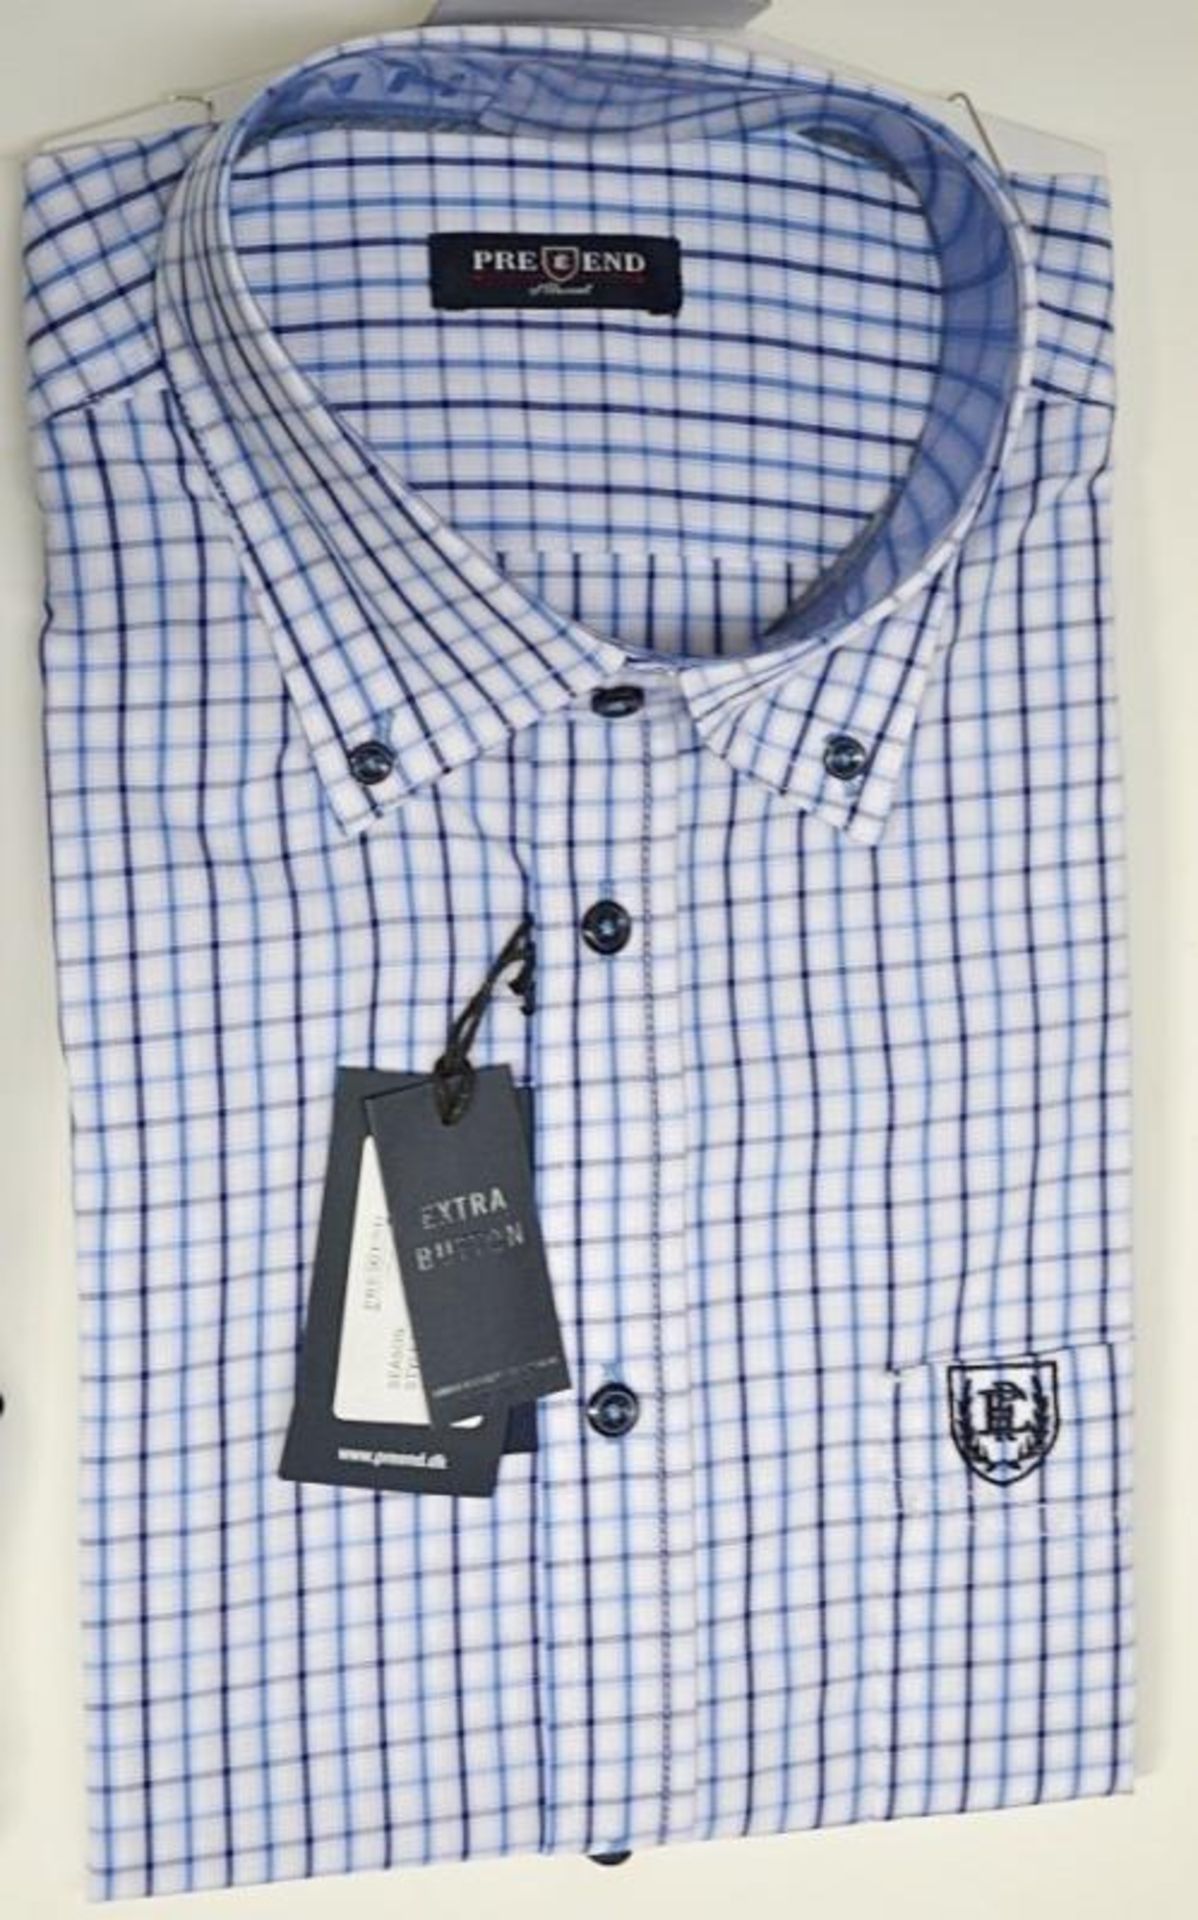 4 x Assorted Pre End Mens Shirts - Various Styles - Suitable For Evenings Out or to Wear in the - Image 4 of 5